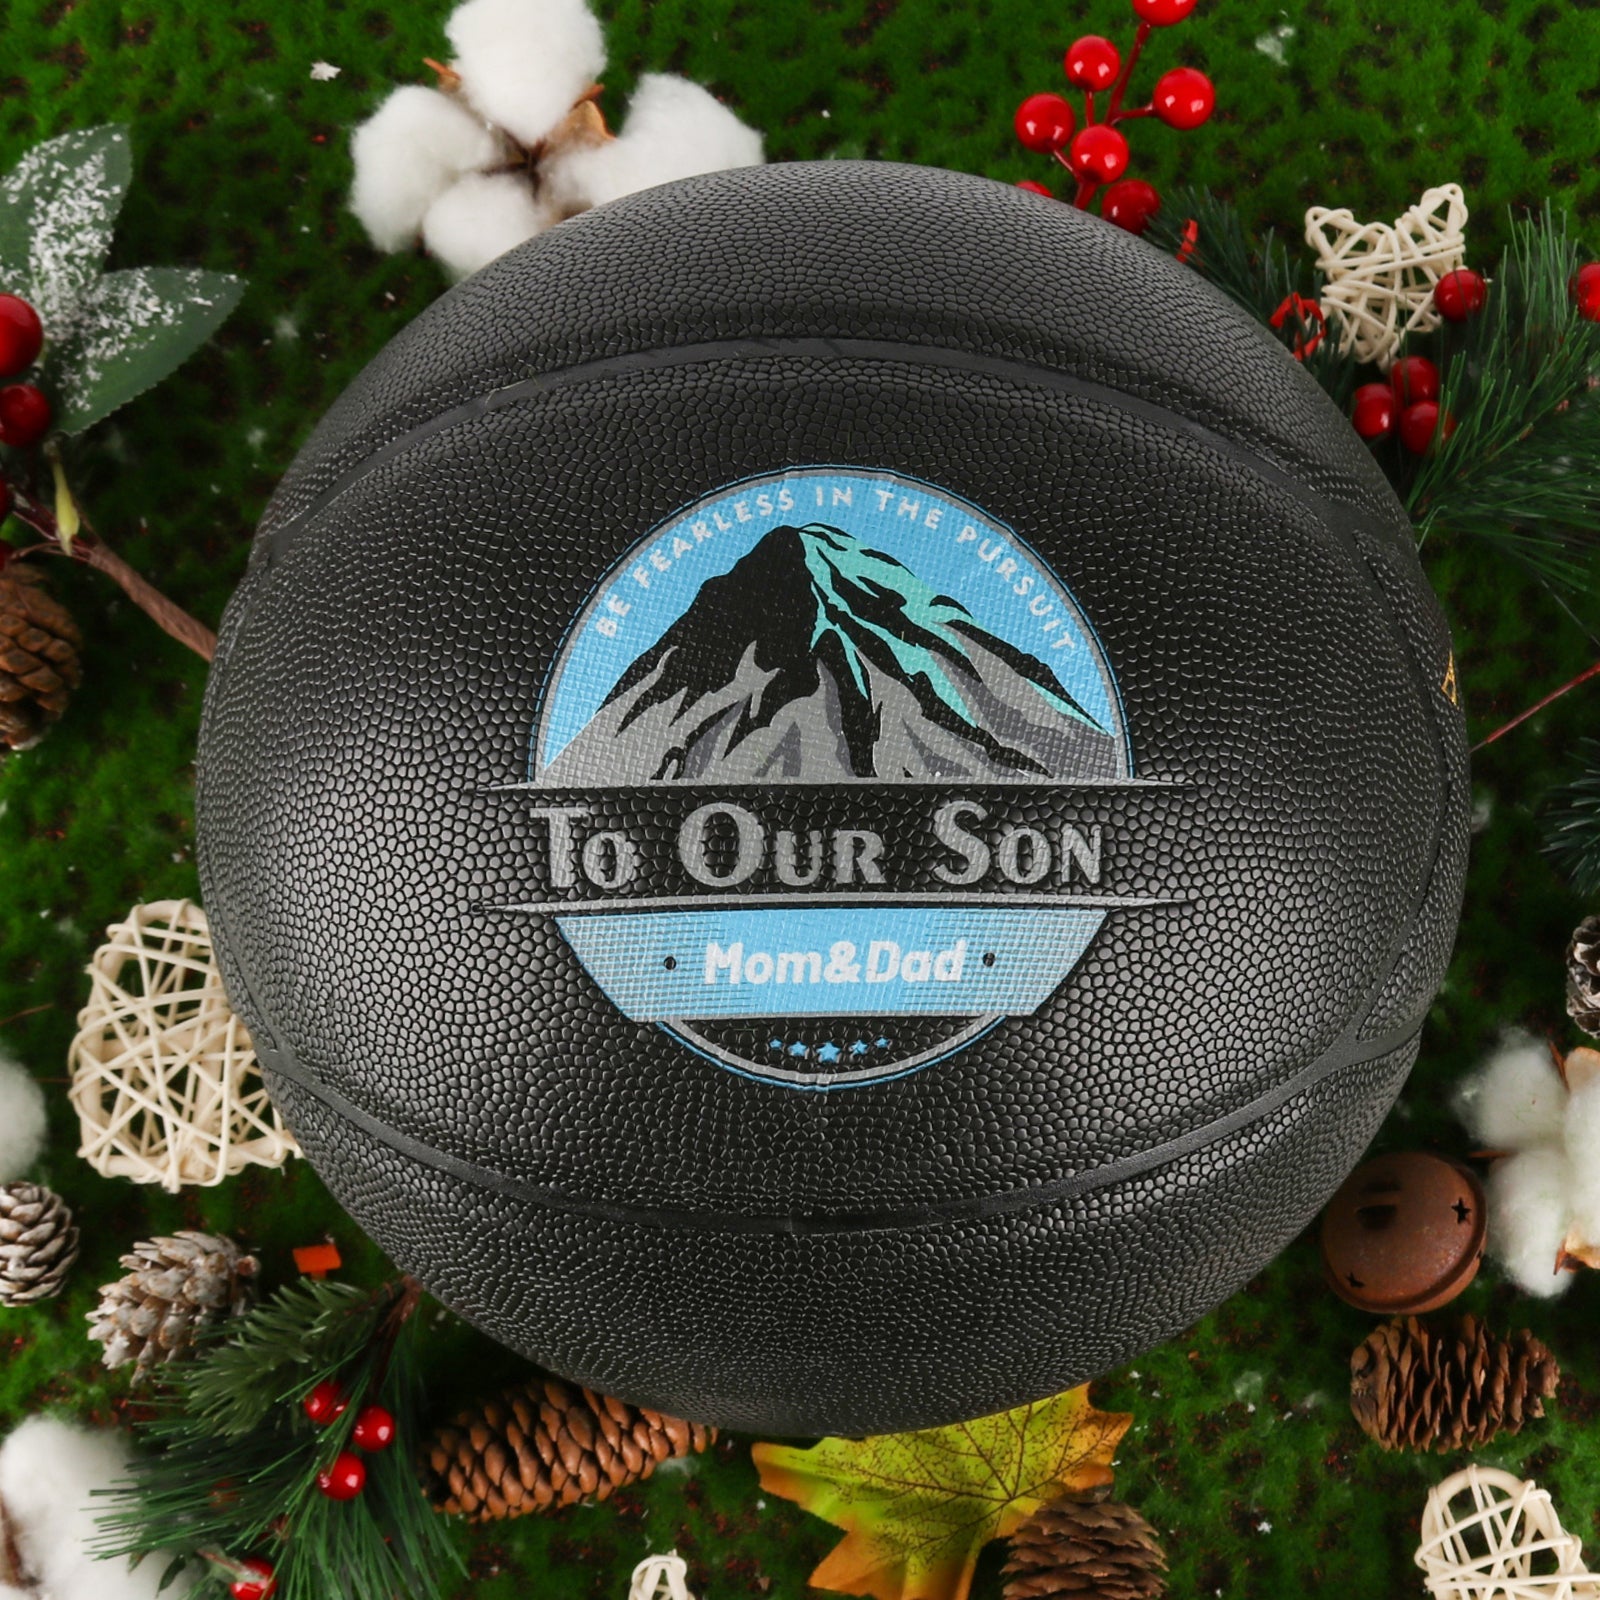 Personalized Letter Basketball For Son, Basketball Indoor/Outdoor Game Ball, Birthday Christmas Gift For Son From Dad And Mom, Black - Family Watchs